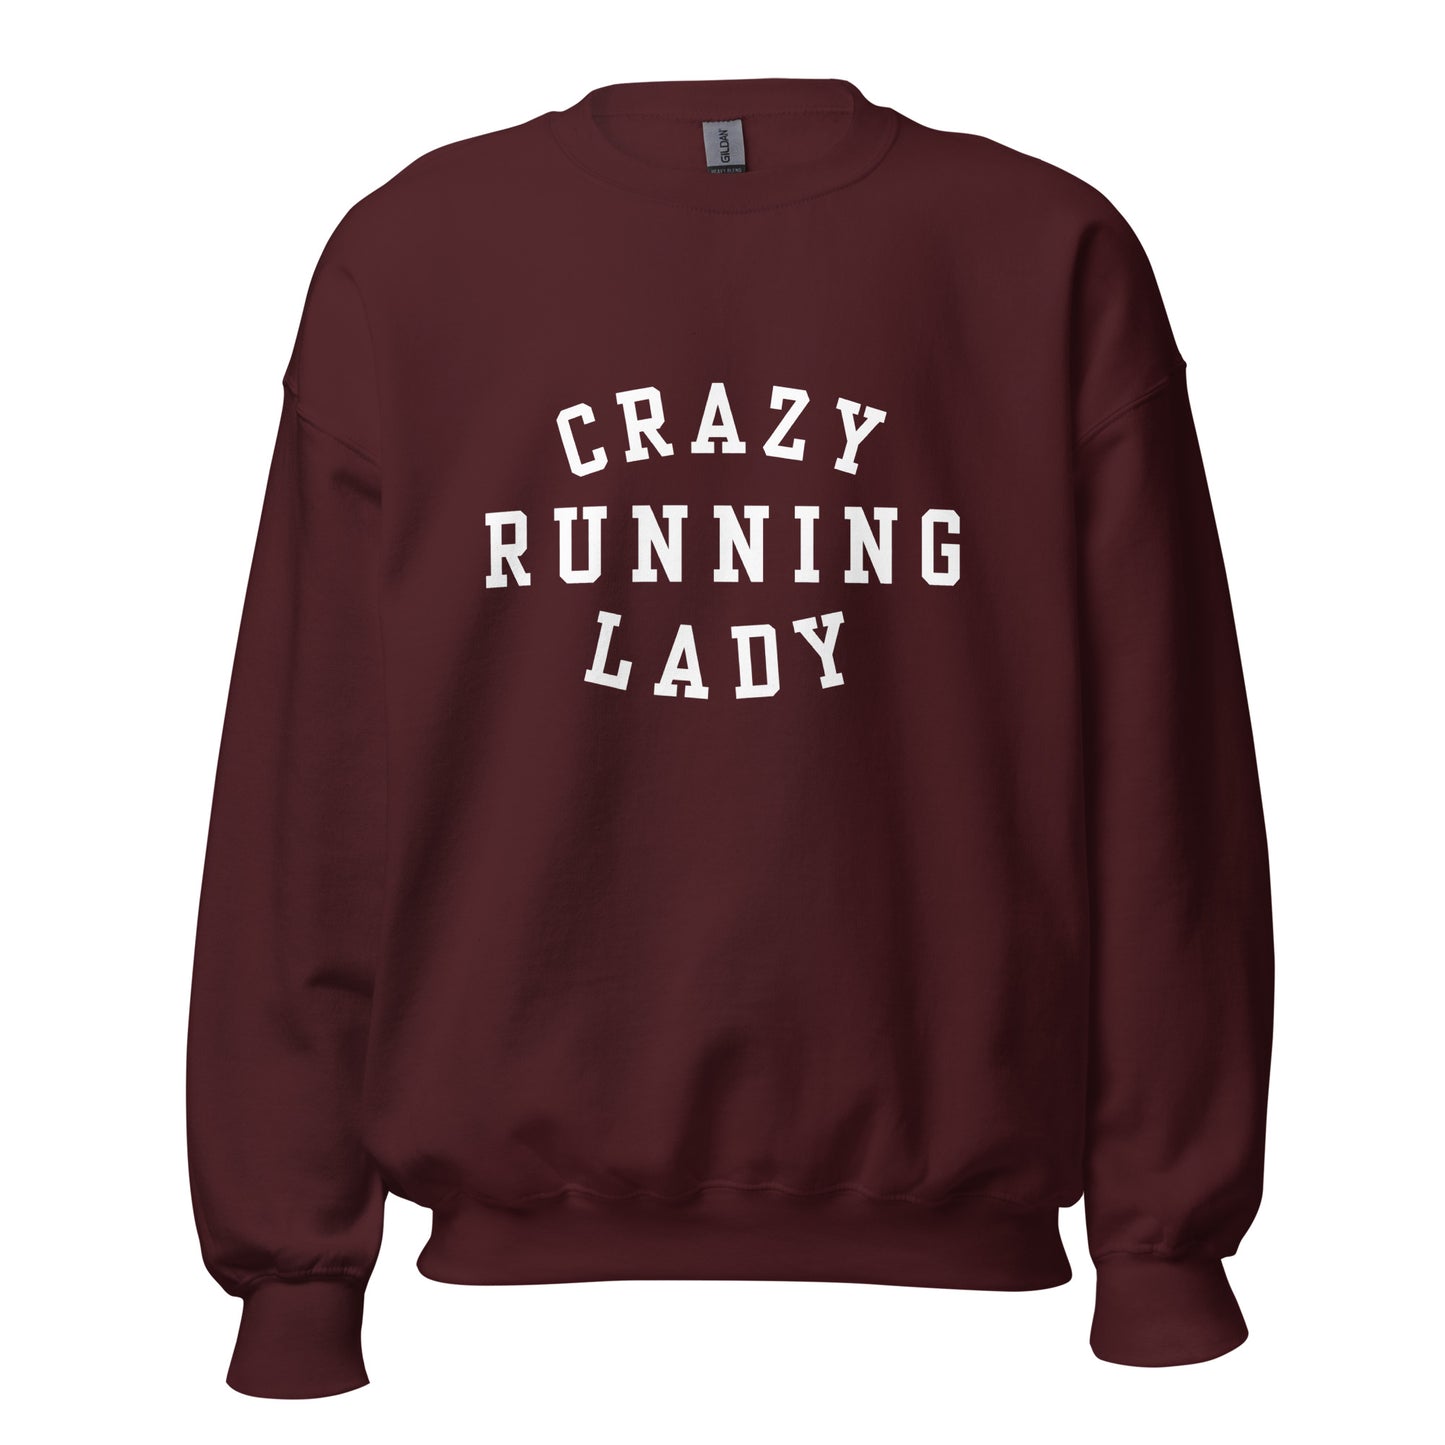 maroon sweatshirt with the words crazy running lady in a capitalised white font